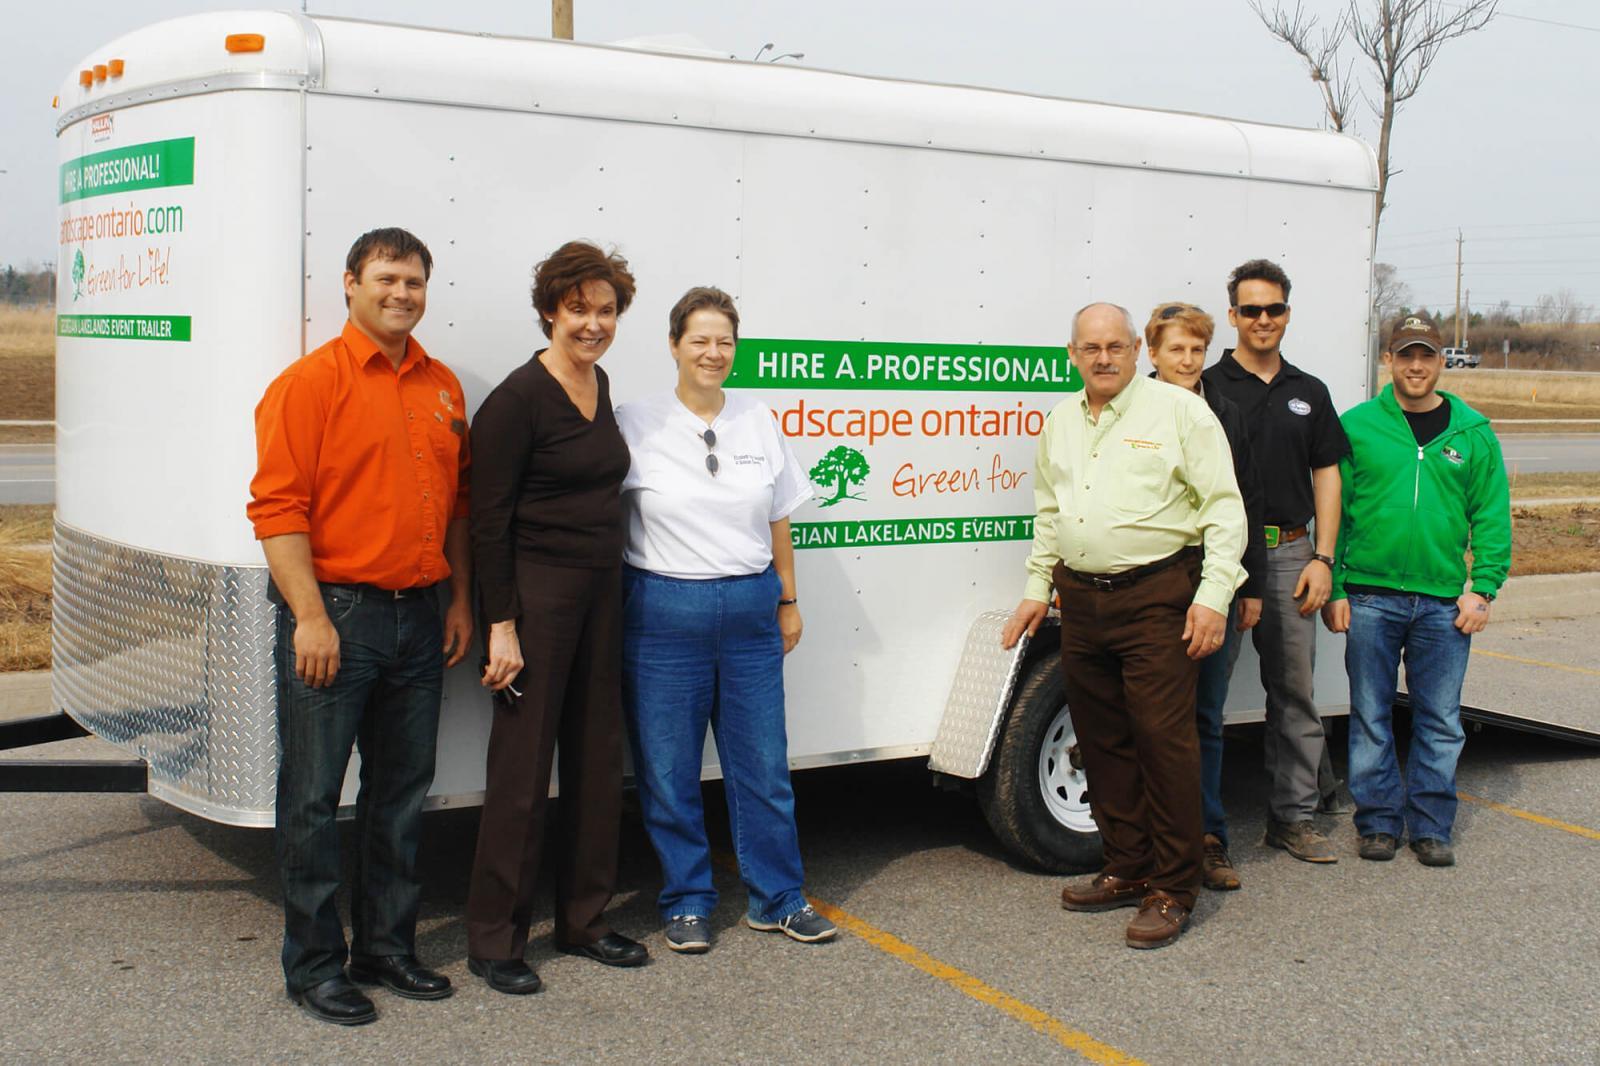 From left, Michael LaPorte, president of Georgian Lakelands Chapter, Aileen Carrol, County of Simcoe MPP, Paula King, executive director of Elizabeth Fry Society of Simcoe County, Bob Adams, LO’s immediate past president, Sheila Allin, Chapter treasurer, Jeff Lee, Chapter vice-president, and David Emms, Chapter director. 